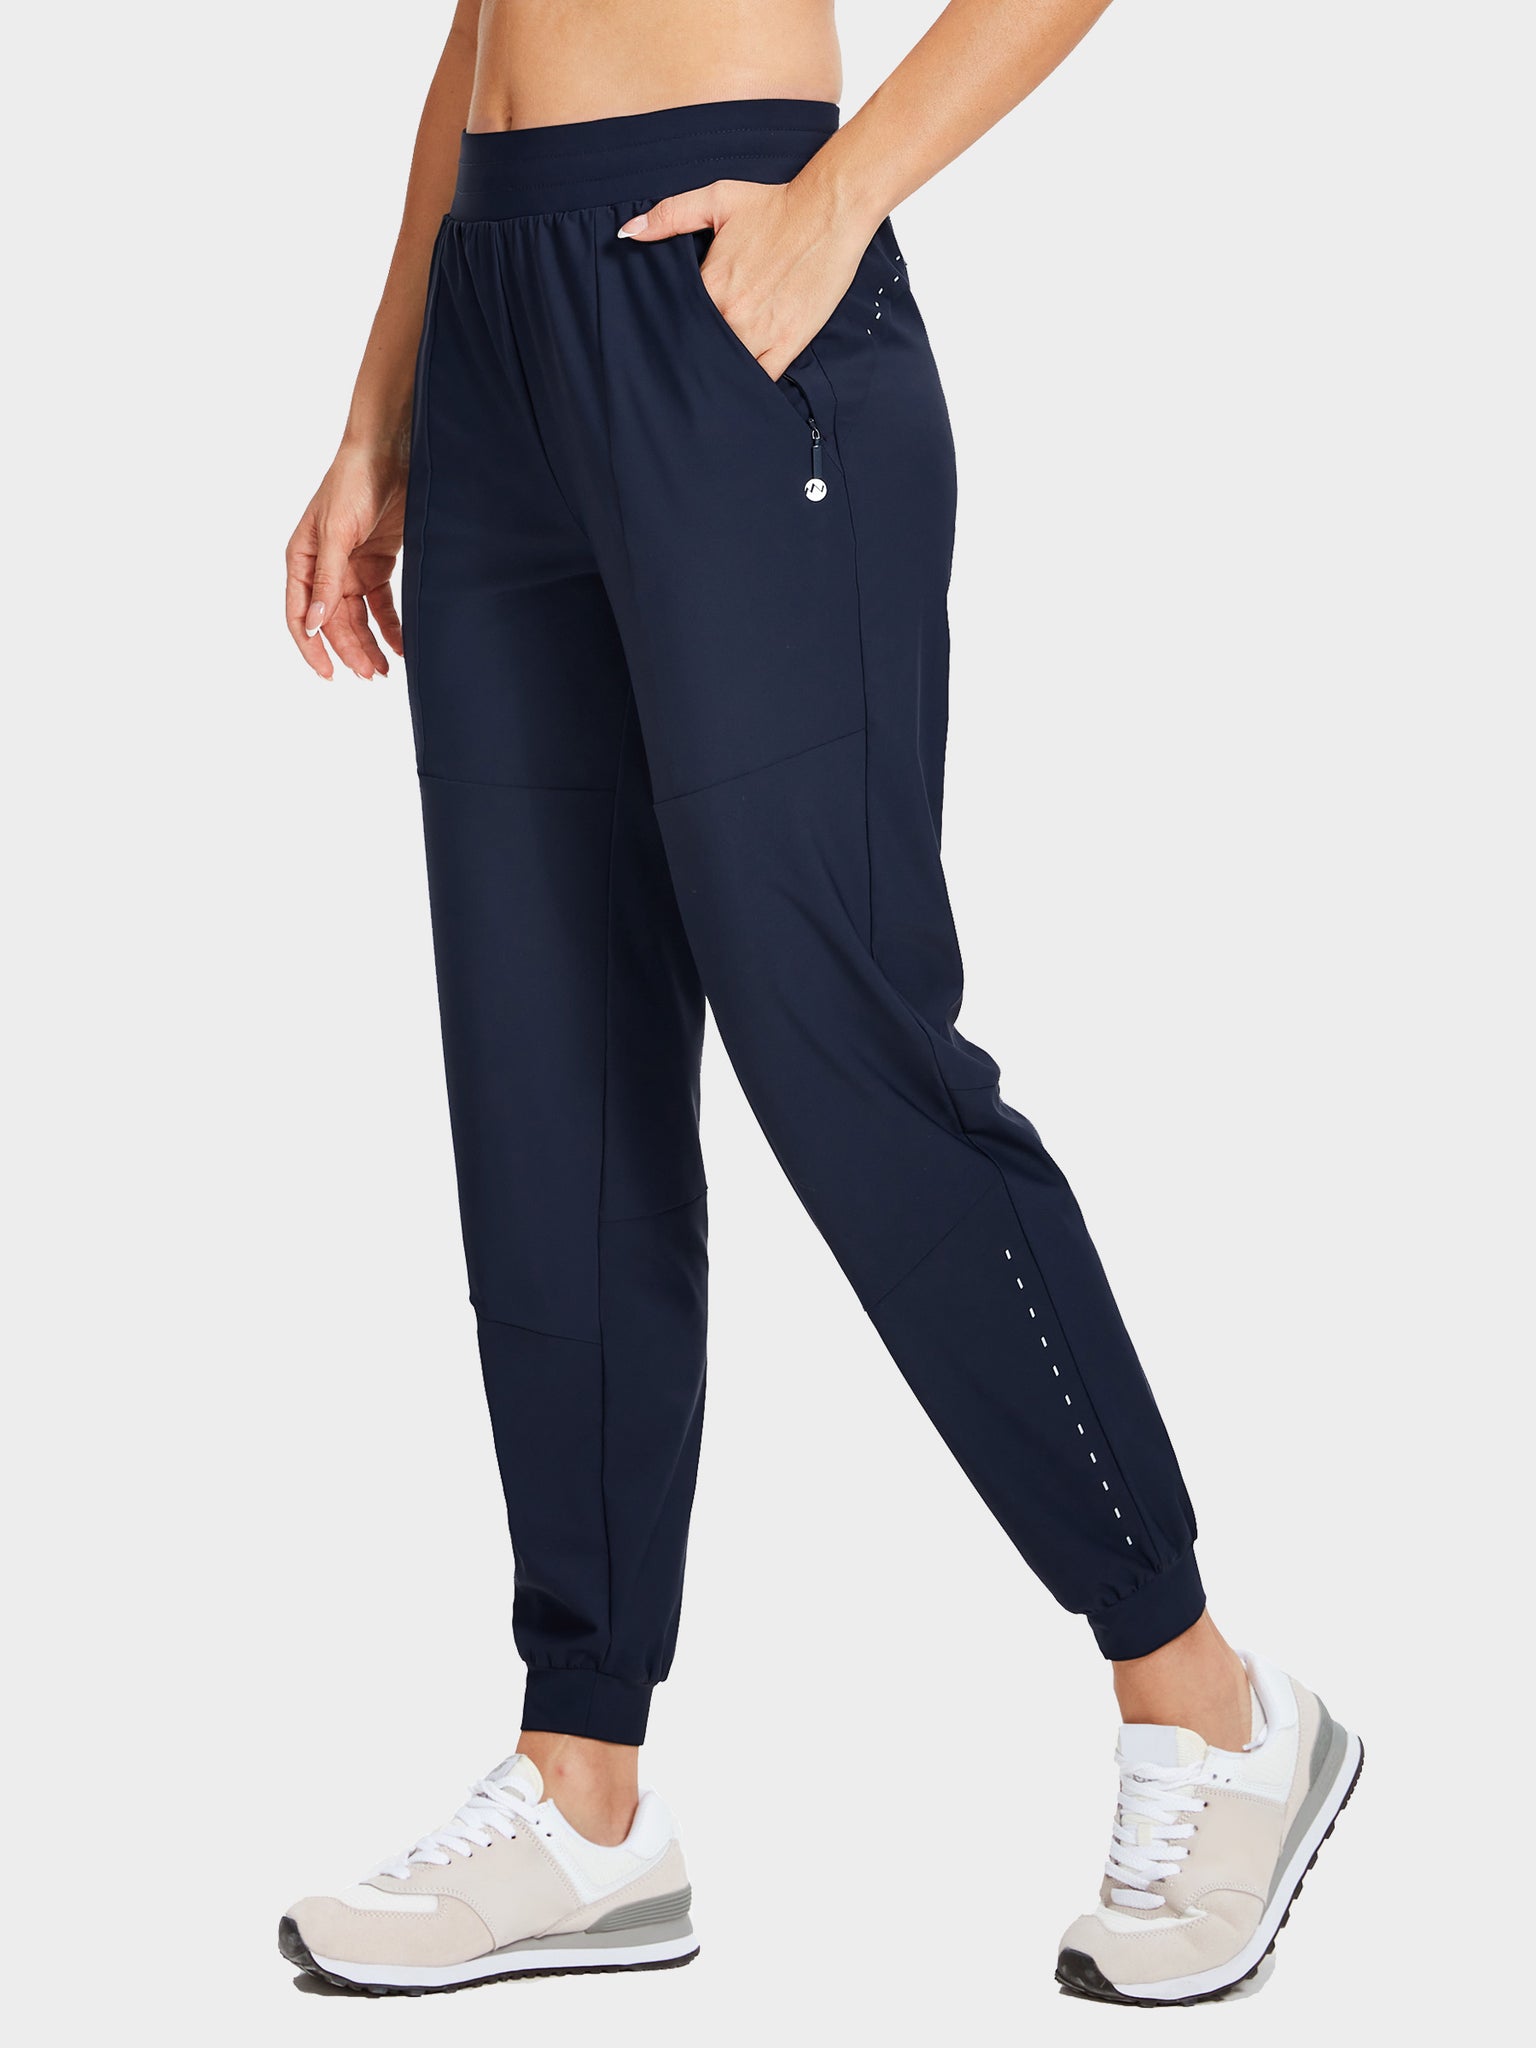 Women'S Loose Fit Joggers With Cuffed Hem, For Yoga, Running